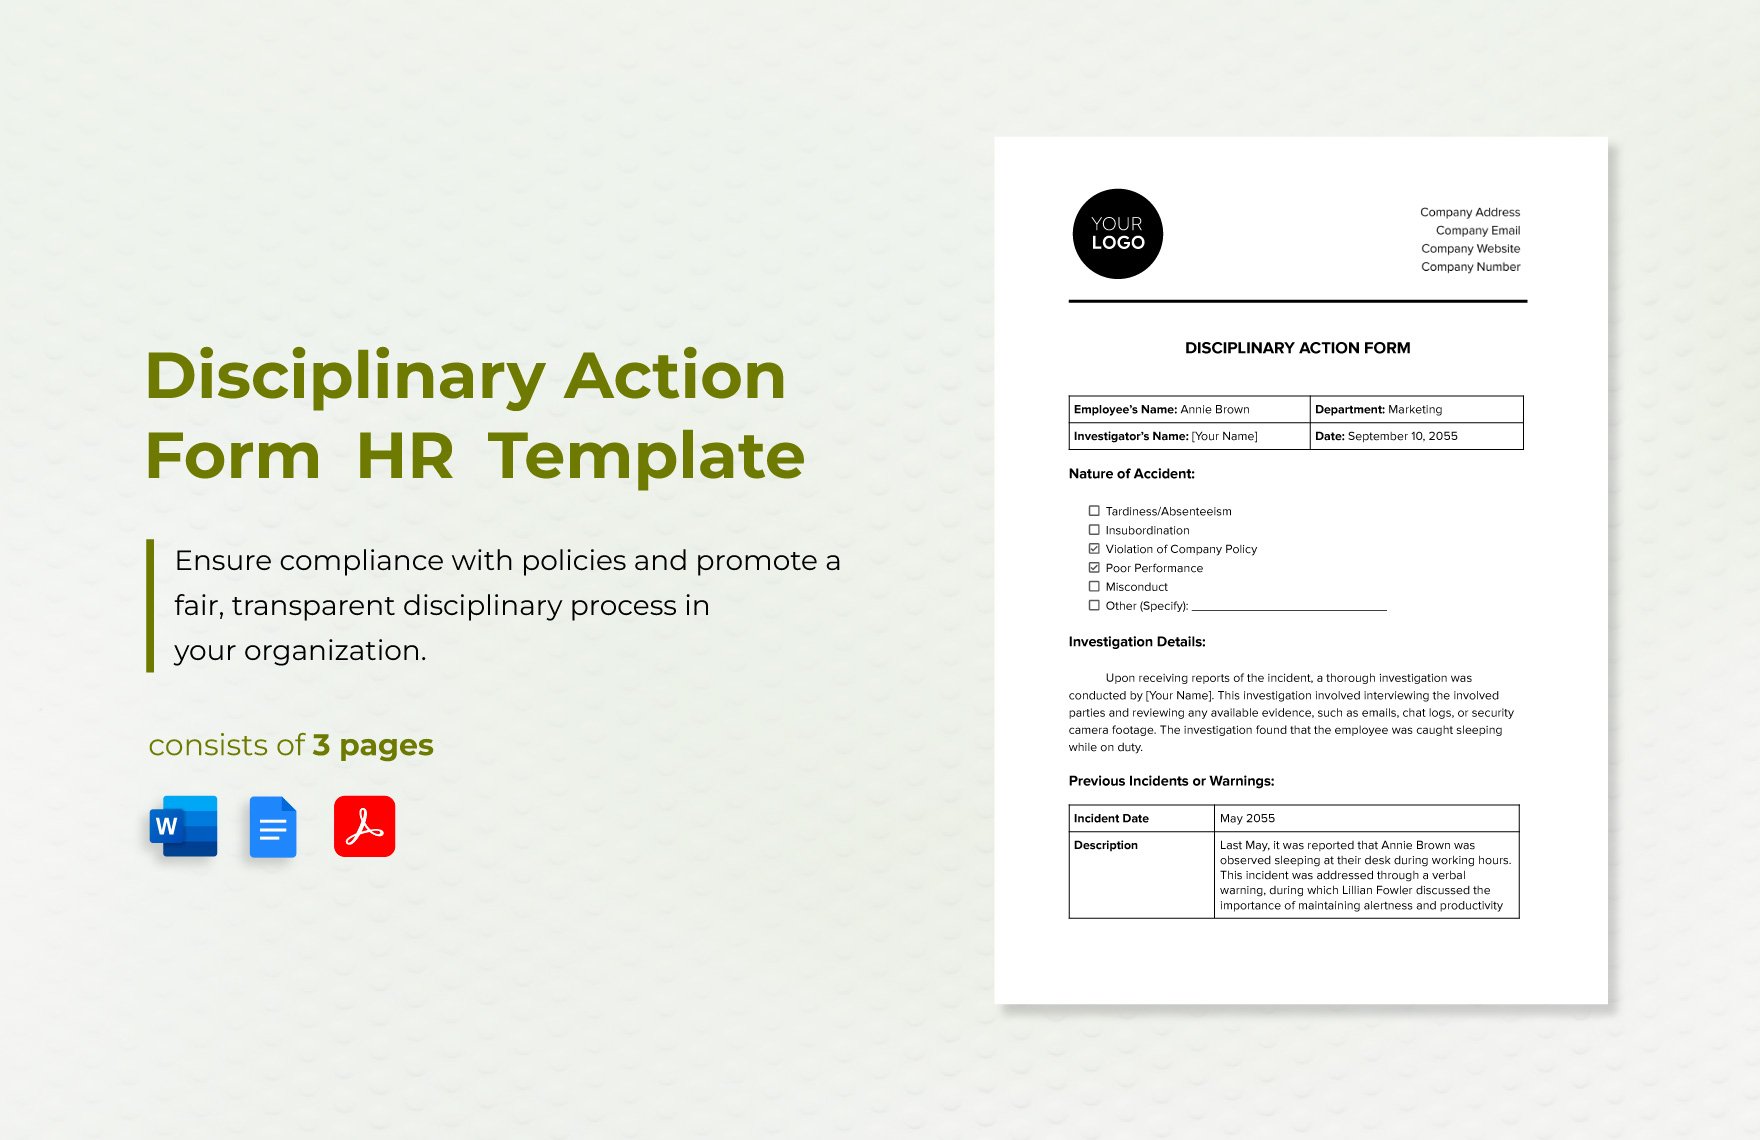 Disciplinary Action Form HR Template in Word, Google Docs, PDF